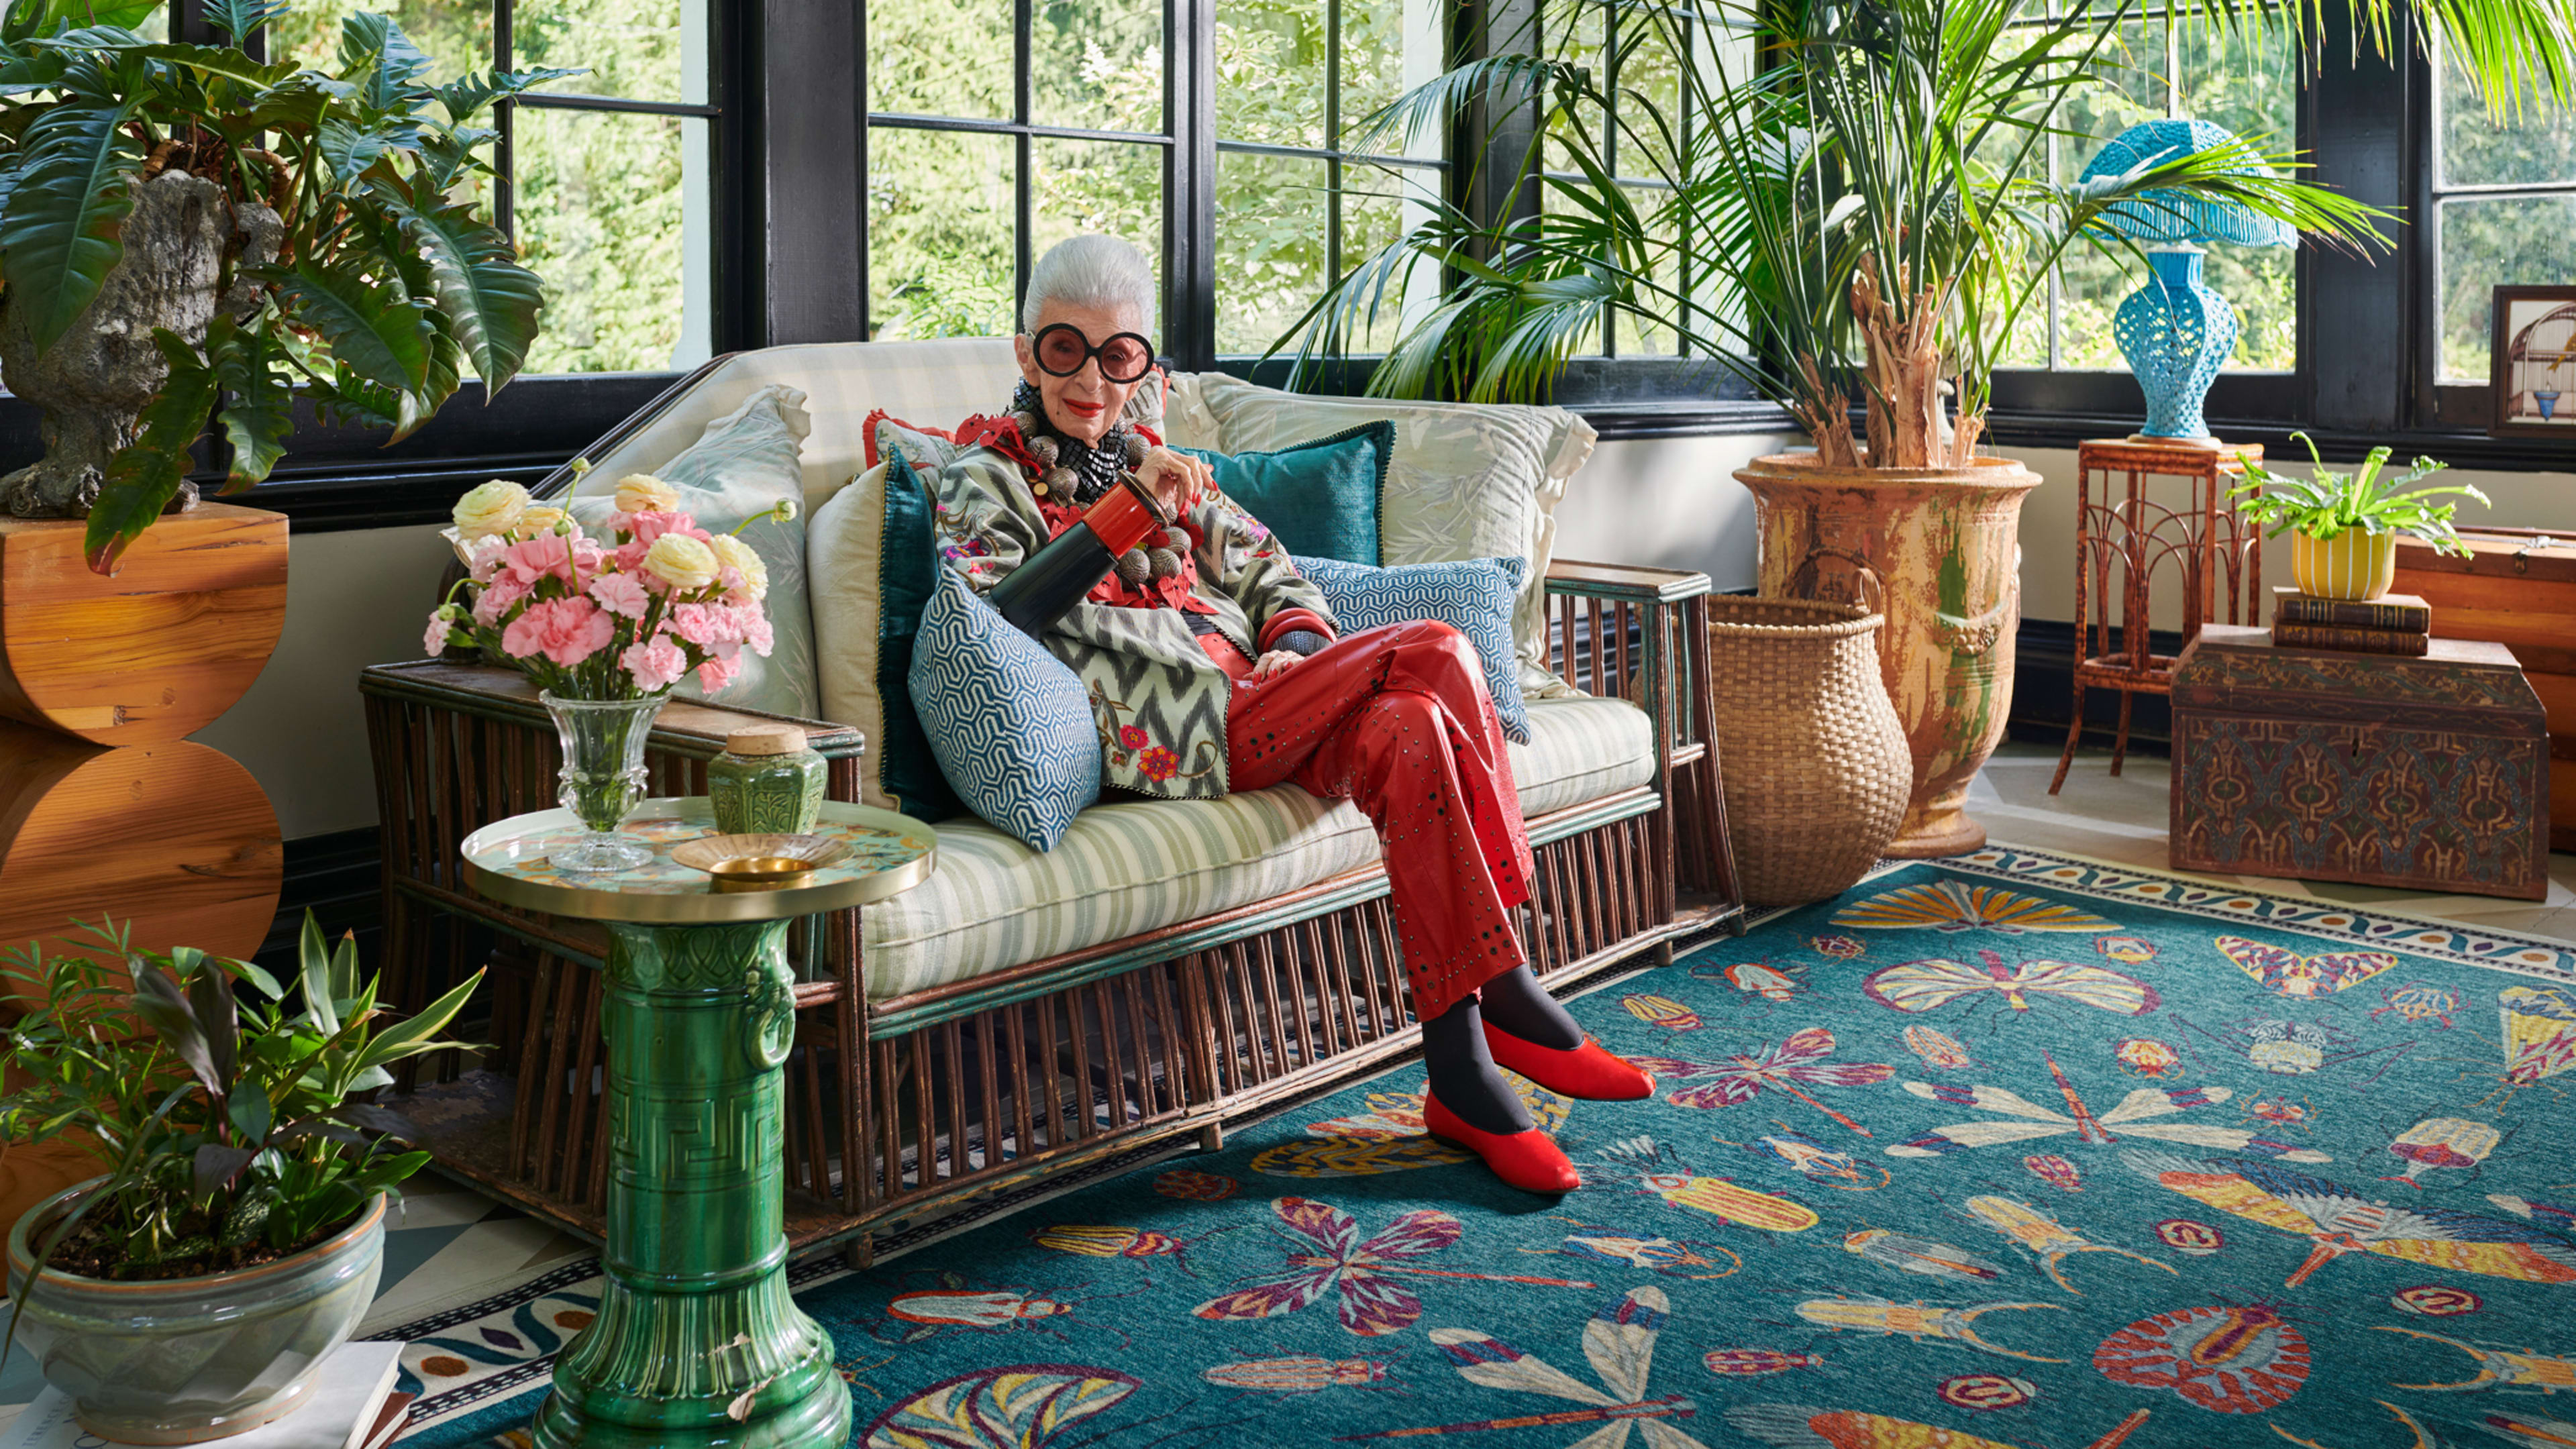 At age 101, Iris Apfel releases her latest work